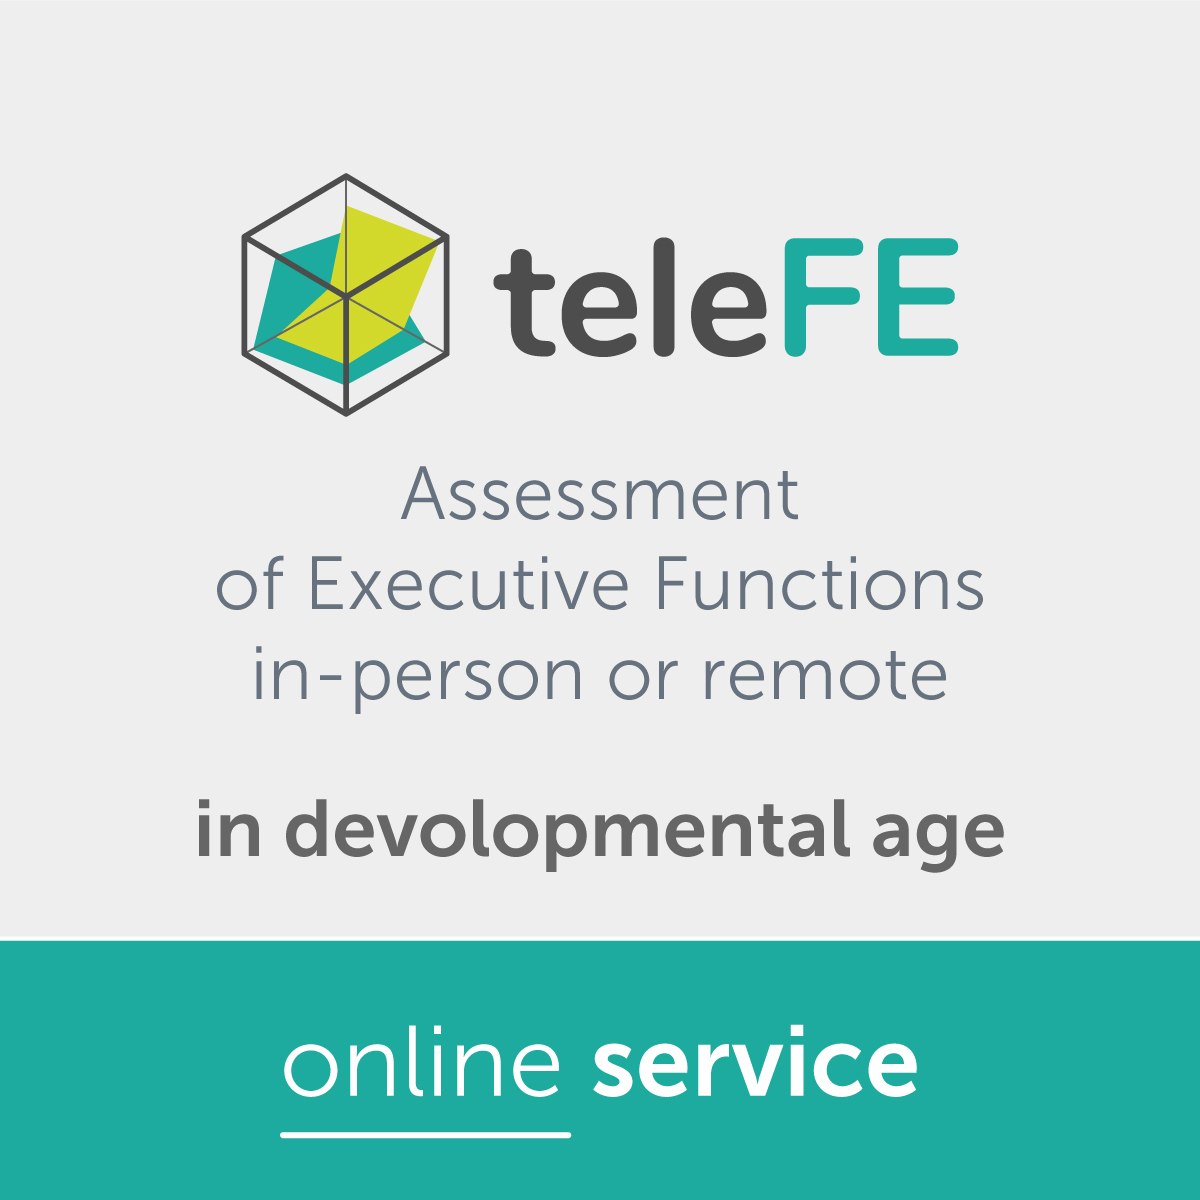 TeleFE - Assessment<br />
of Executive Functions in-person or remote in developmental age